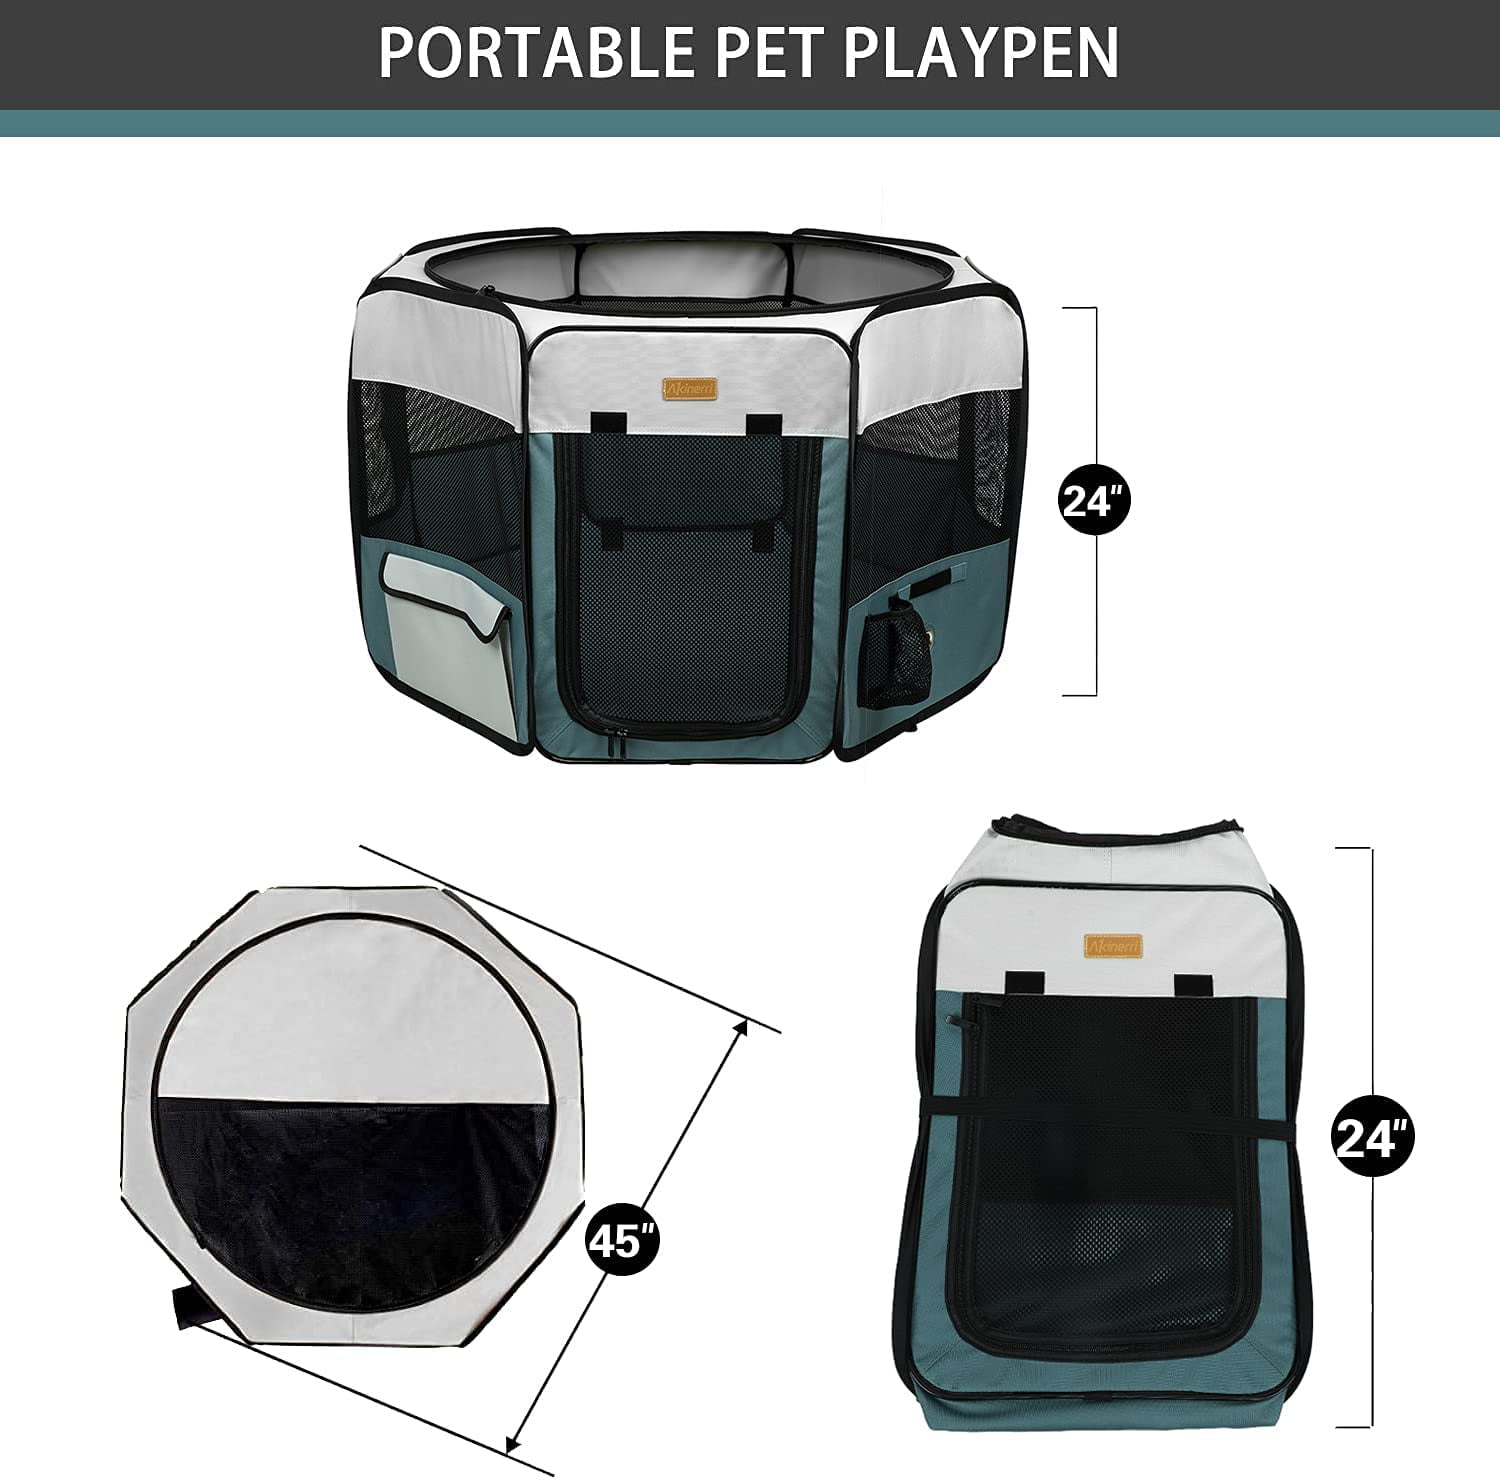 Akinerri Pet Playpen Portable Foldable Playpen for Dog/Cat/Puppy Exercise Kennel Dogs Cats Indoor/Outdoor Removable Mesh Shade Cover 